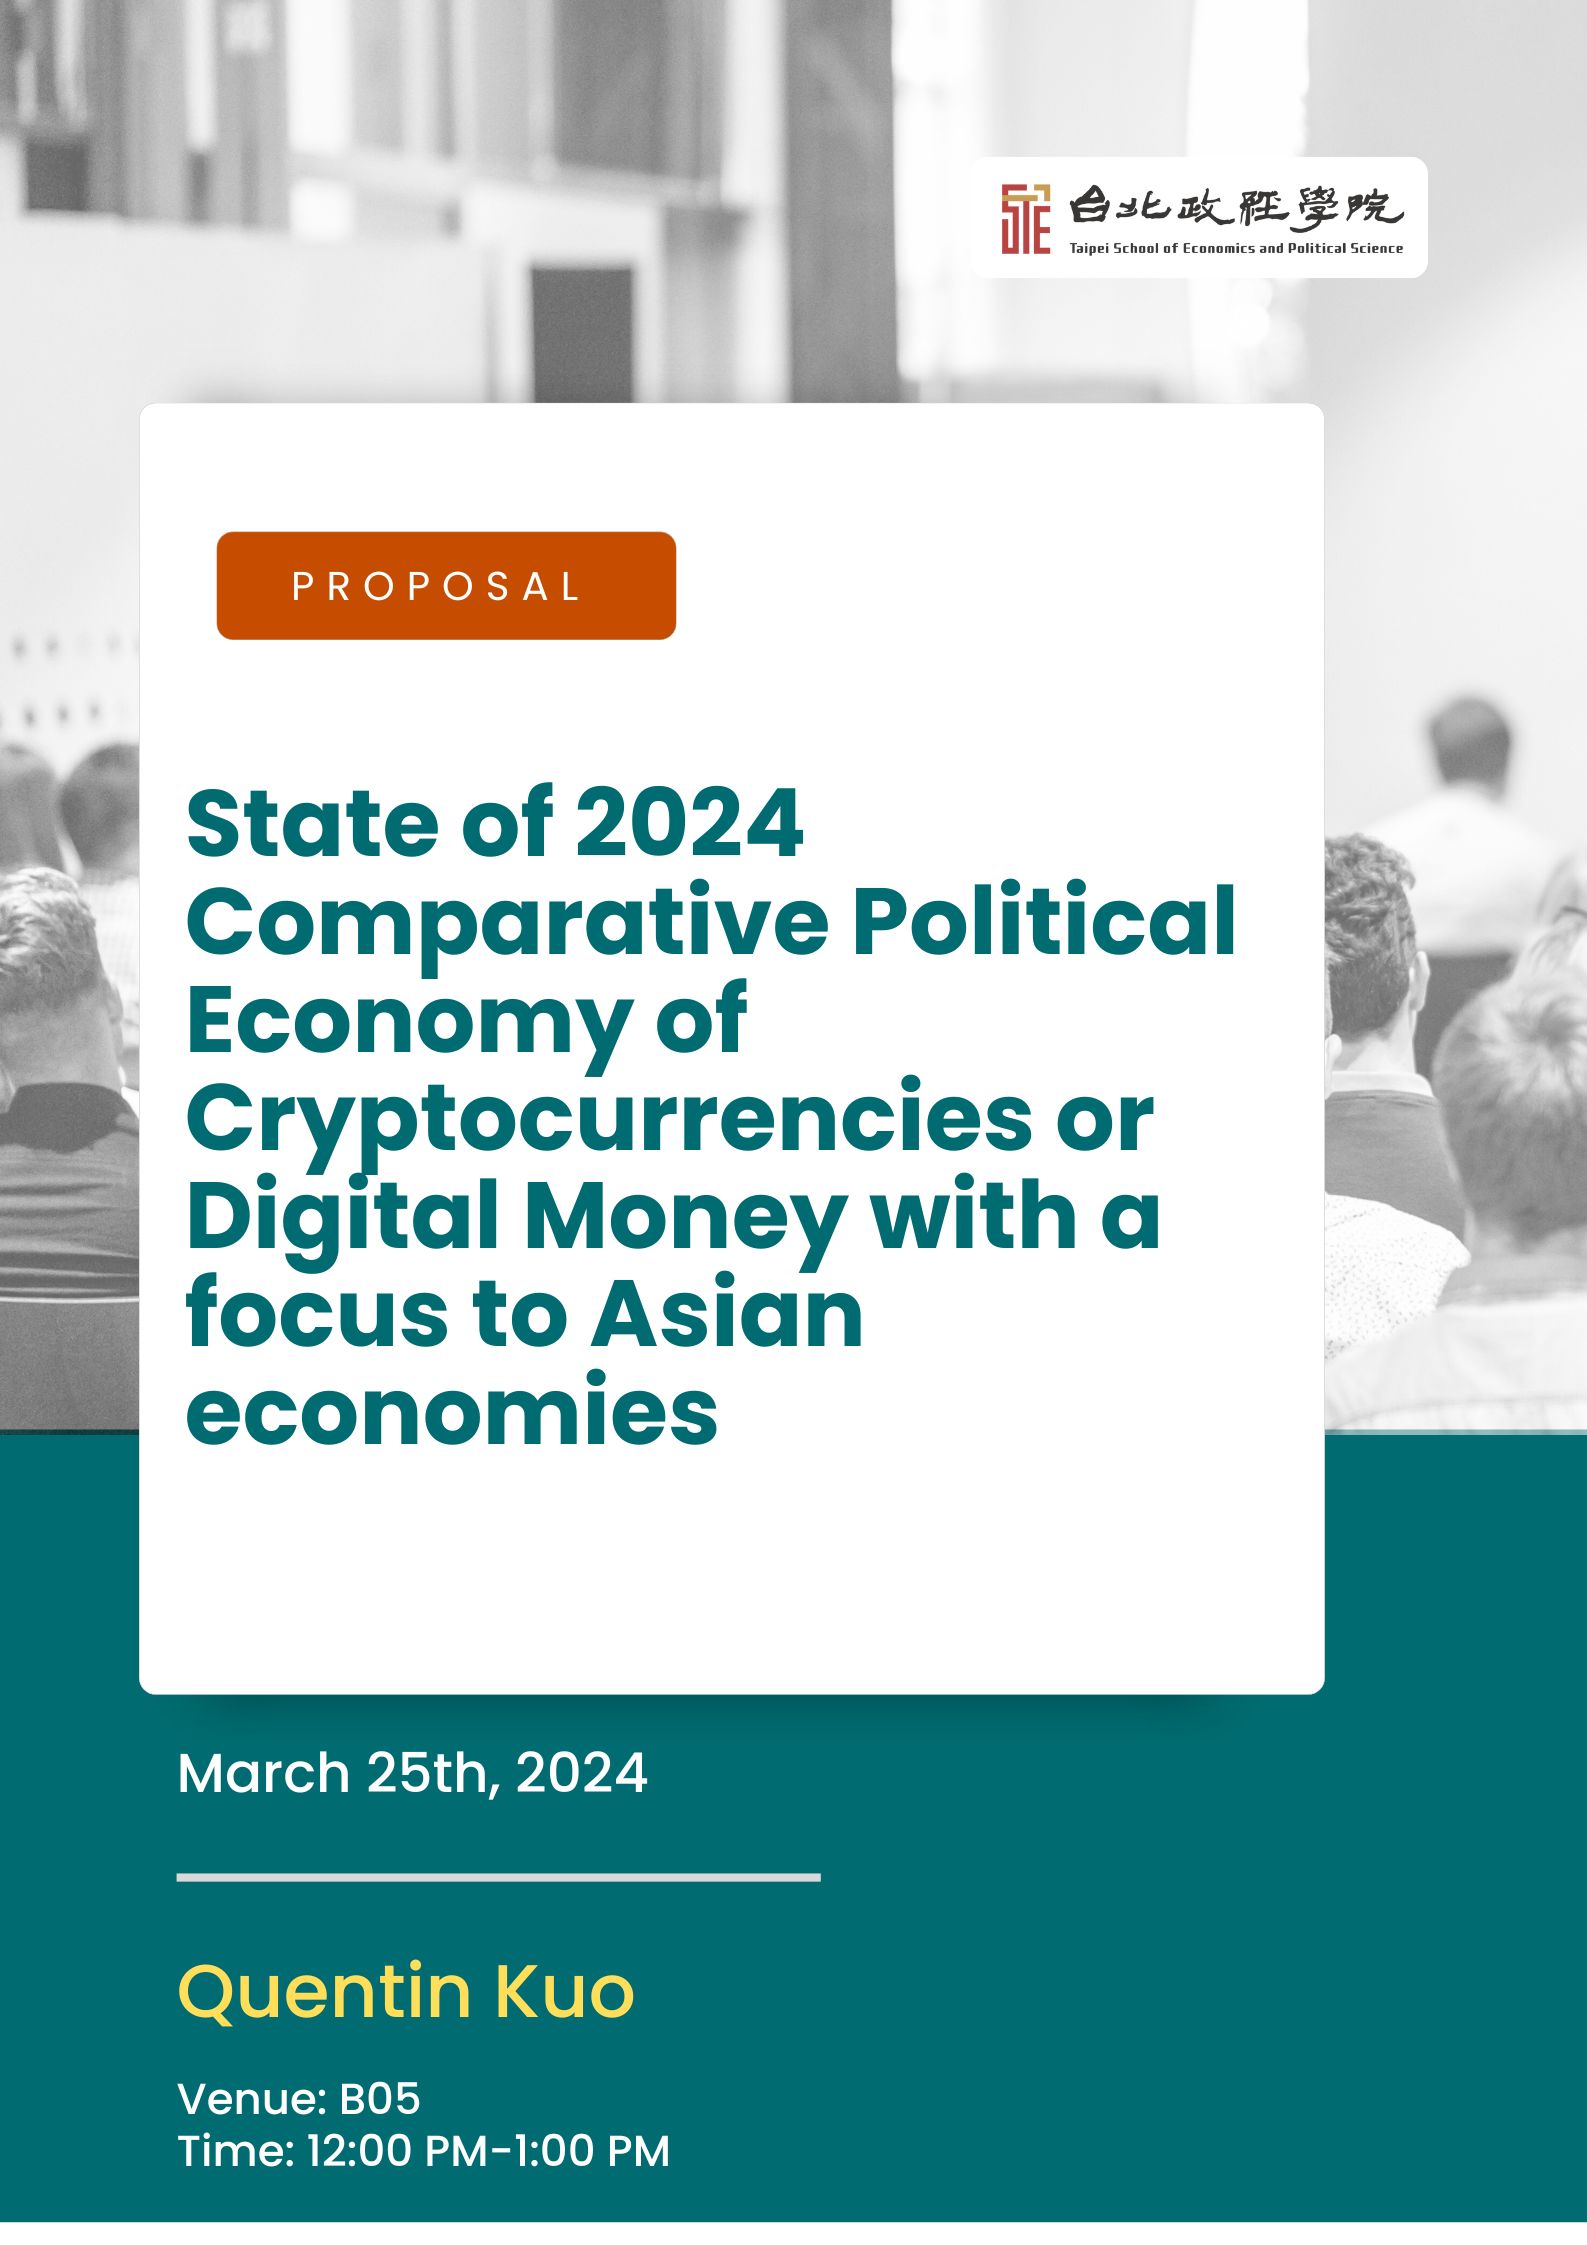 MA Thesis Proposal Presentation at B05 on March 25 2024 at 12:00 titled "State of 2024 Comparative Political Economy of Cryptocurrencies or Digital Money with a focus to Asian economies" by Quentin Kuo